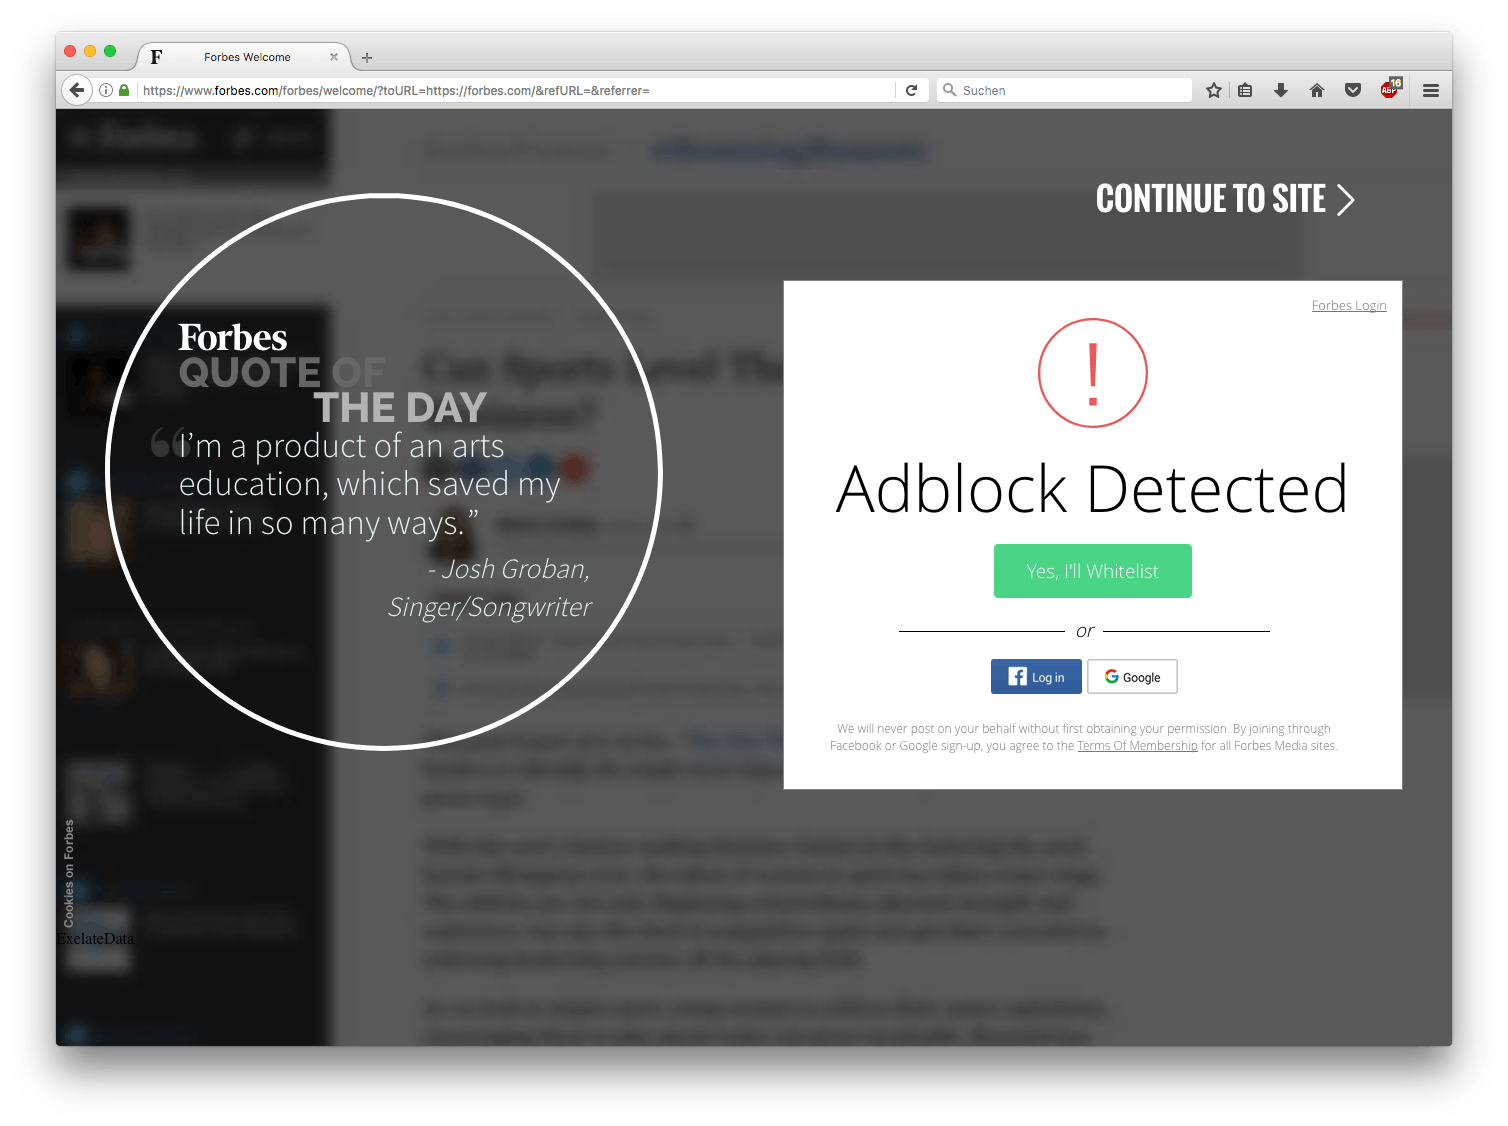 Figure 3: an example of an ad block wall encouraging users to whitelist trackers.